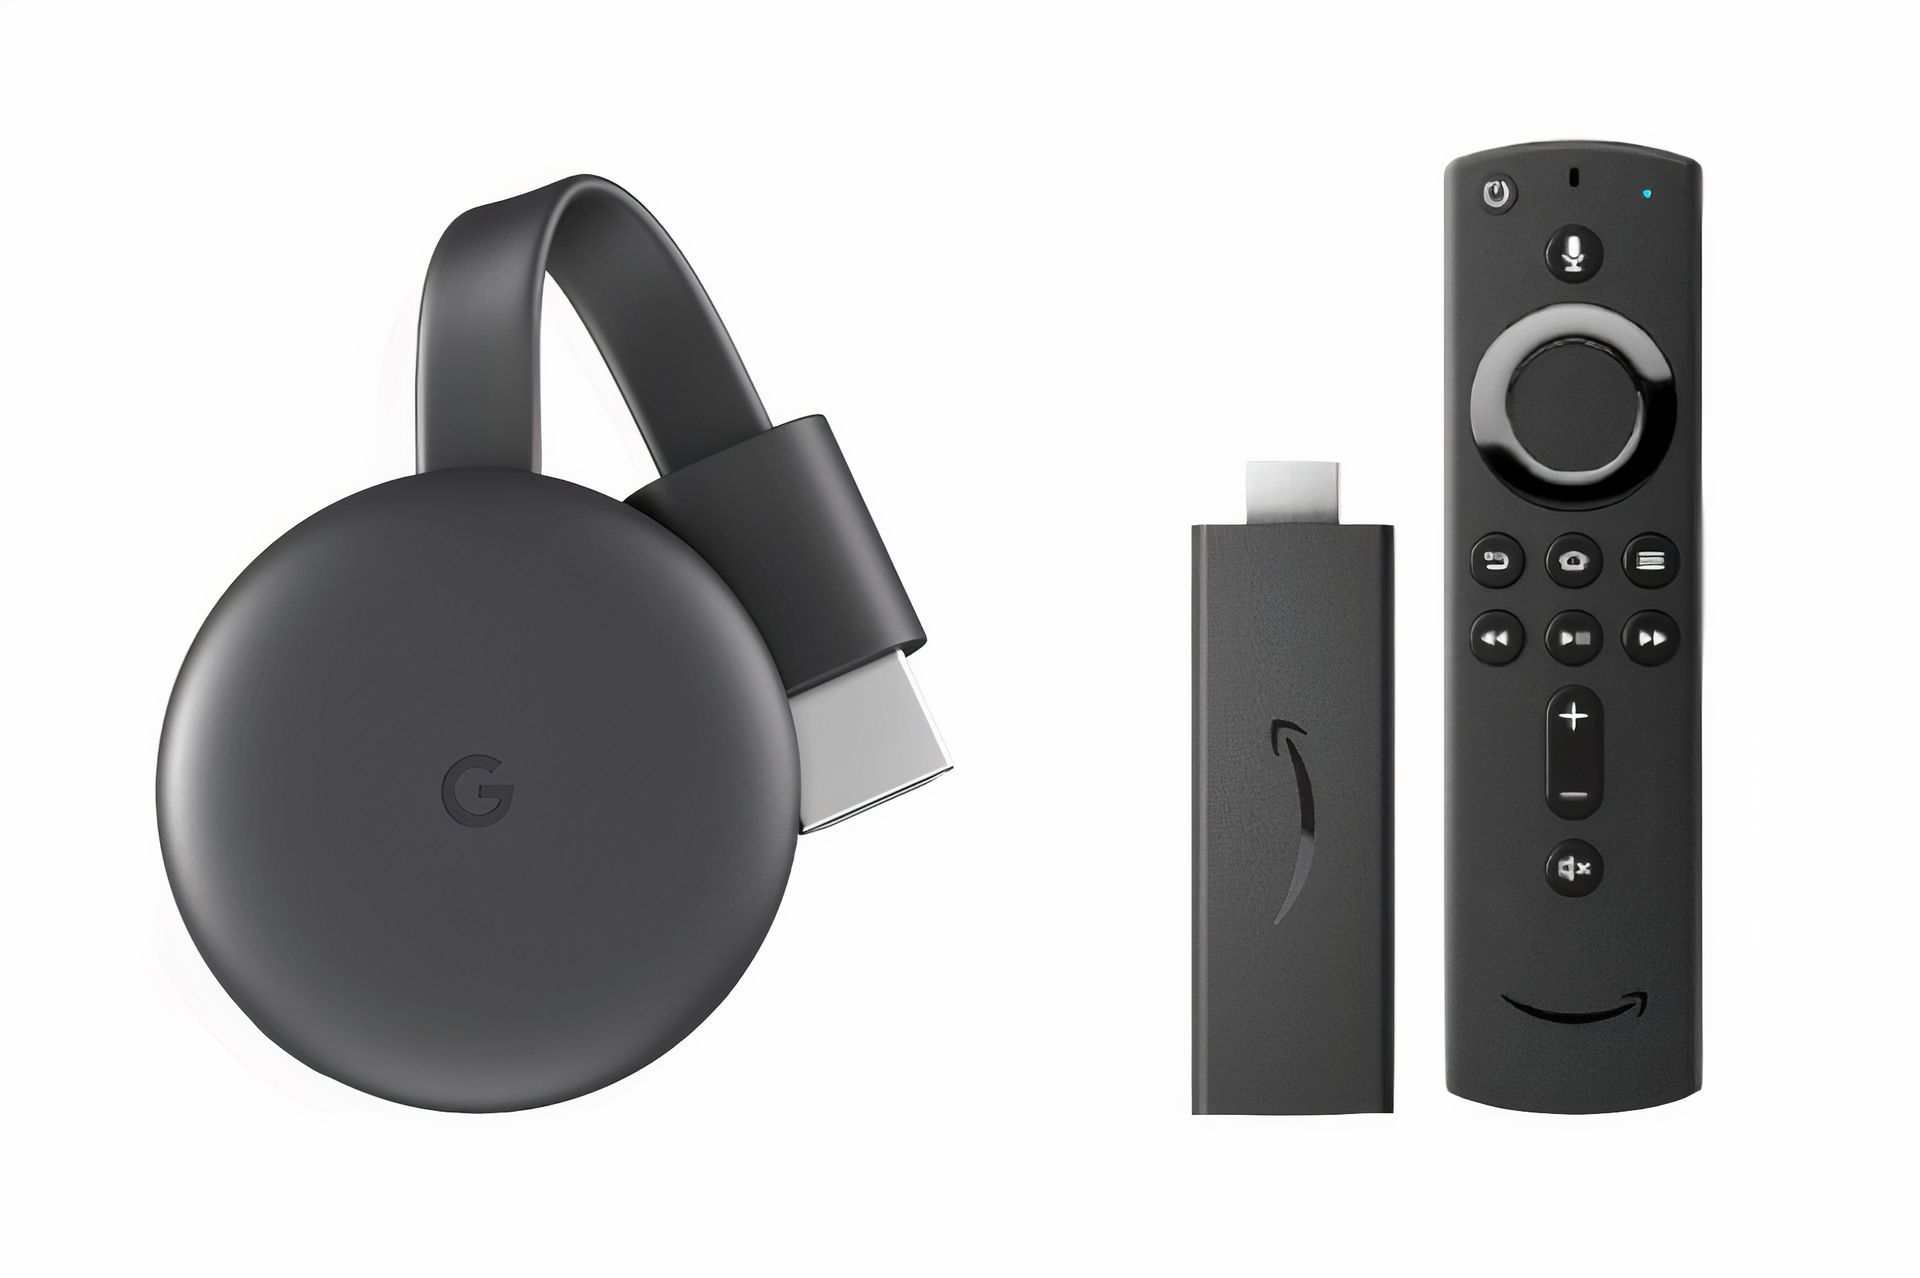 Google Chromecast - Streaming Device with HDMI Cable and Voice Search  Remote - Stream Shows, Music, Photos, Sports from Phone to TV - Includes